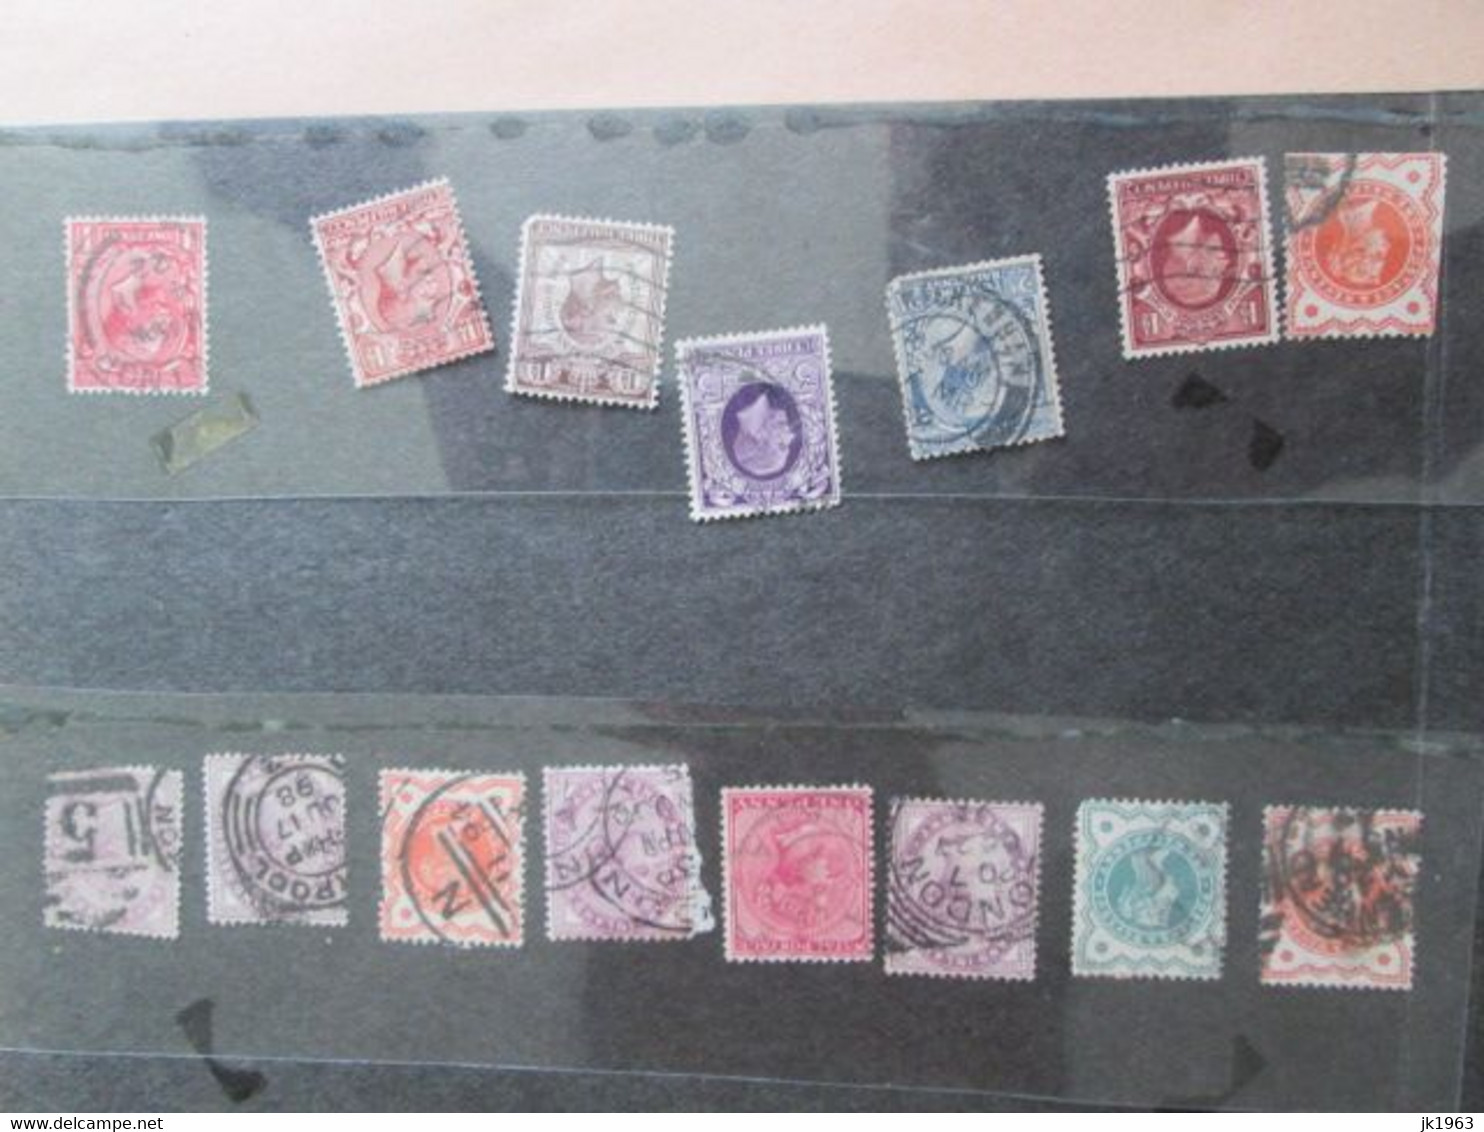 STAMPS, PERFINS, COVERS